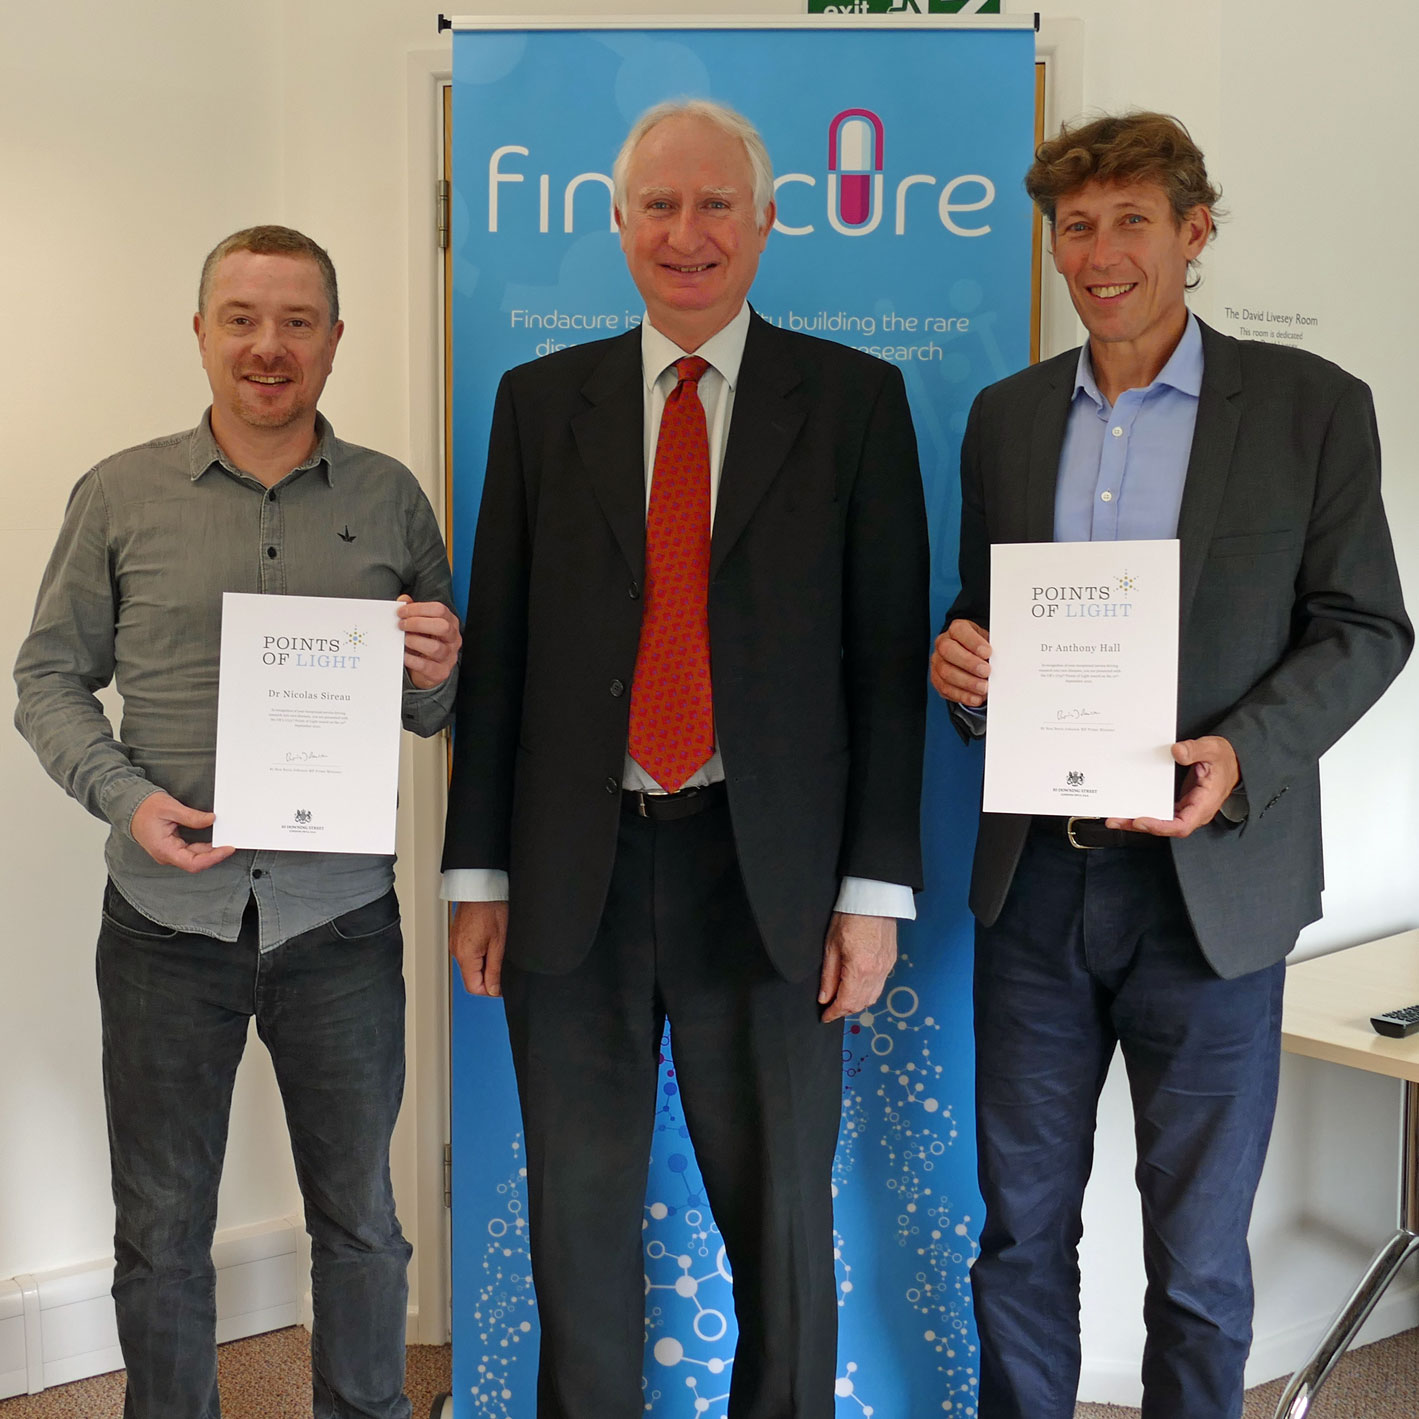 Photo of Tony Hall and Nick Sireau being awarded their point of light certificates by Daniel Zeichner MP for Cambridge